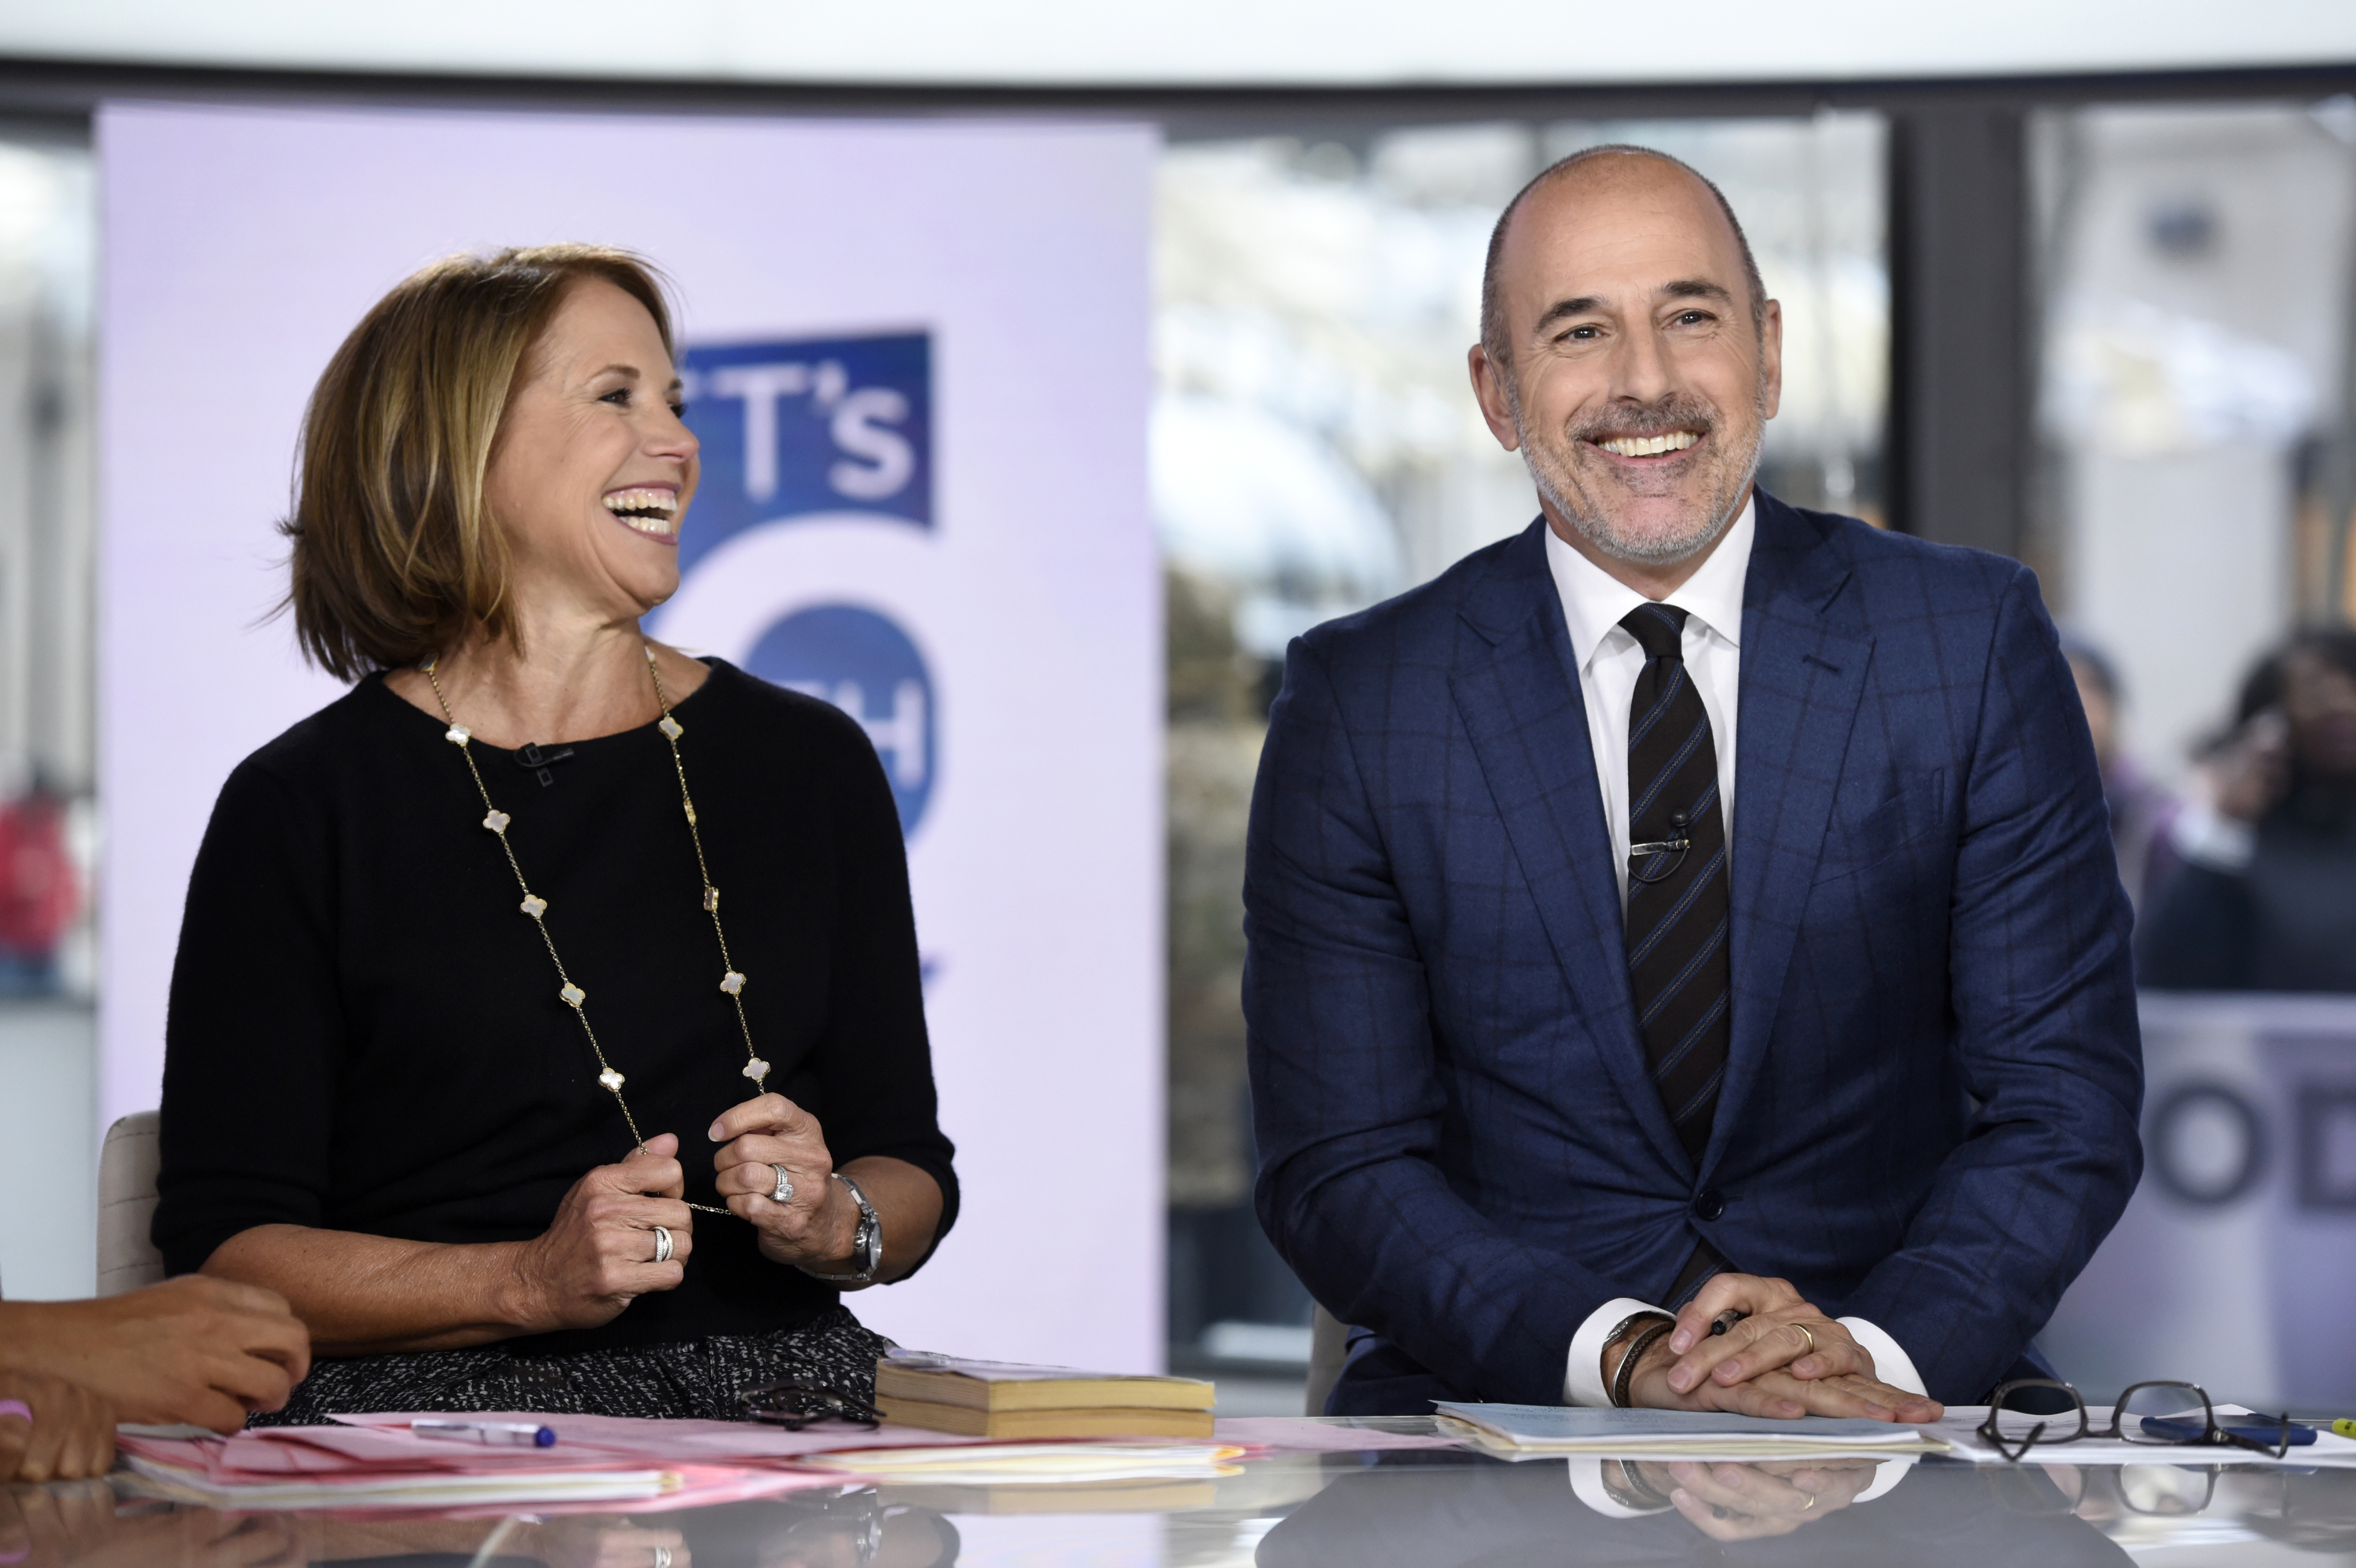 Matt Lauer Issues Statement on Sexual Misconduct Allegations